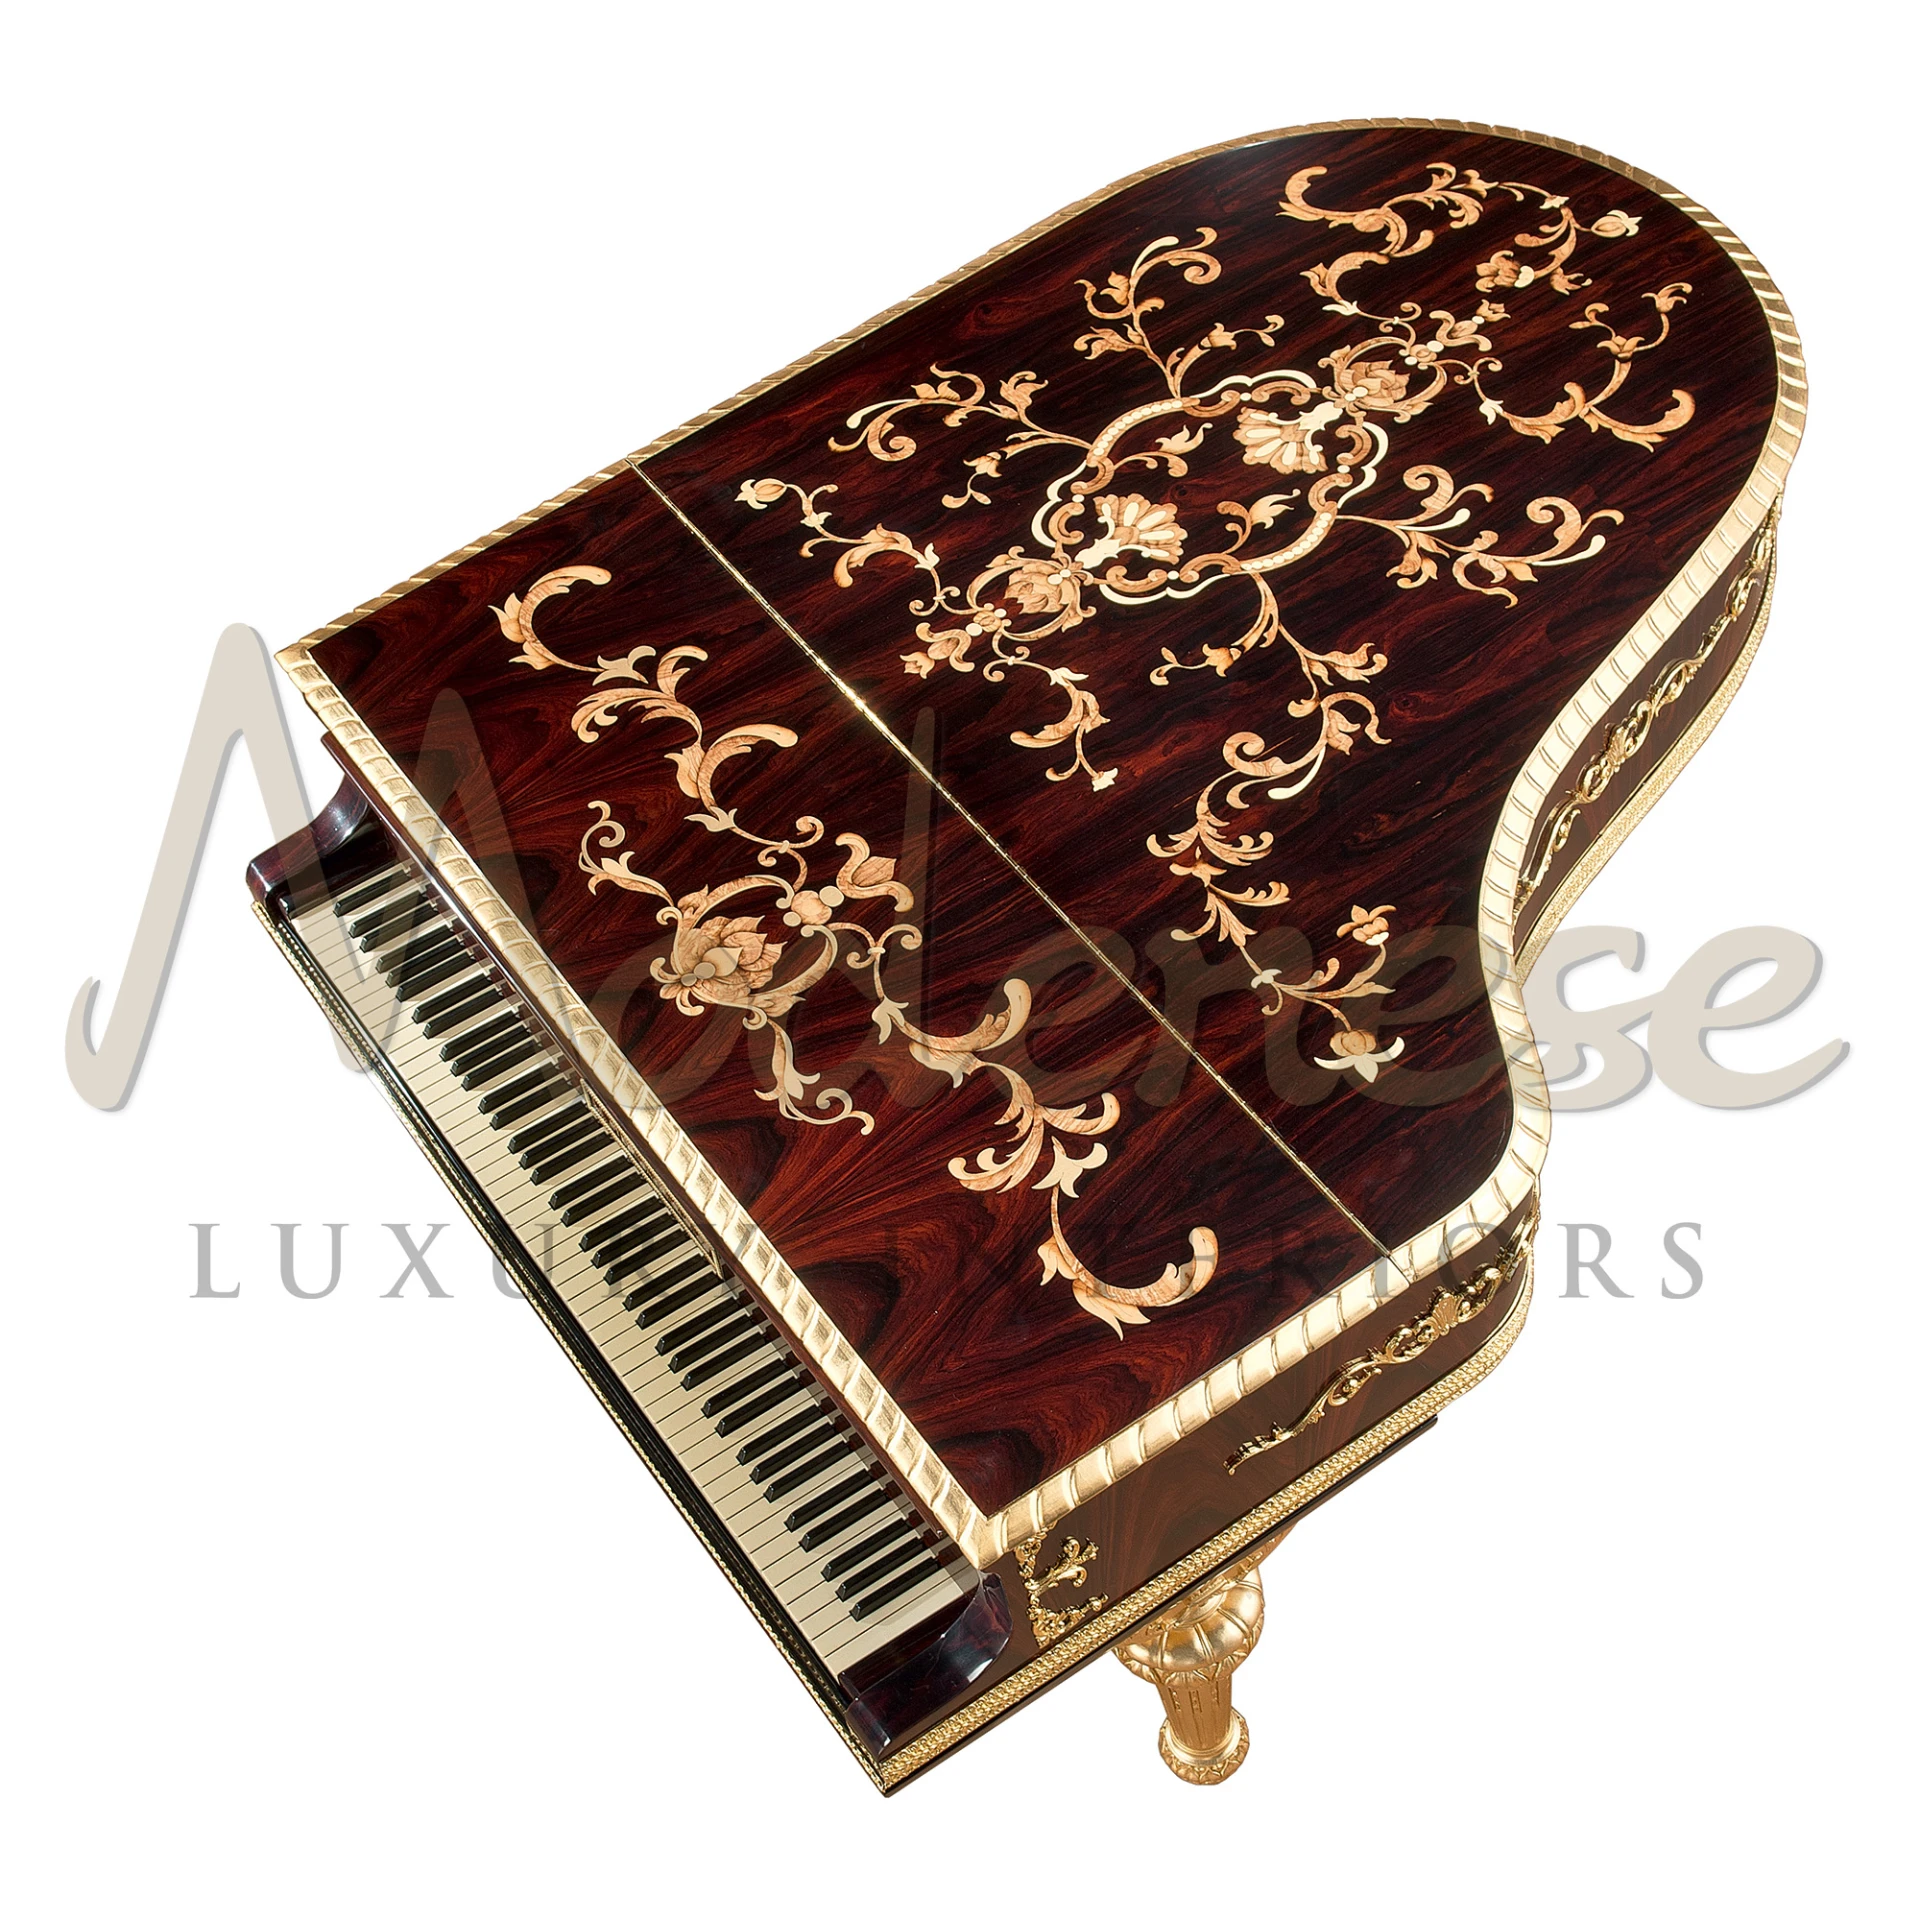 Luxury Modenese Furniture piano, crafted from mahogany with intricate carvings, embodying classic elegance and superior sound.